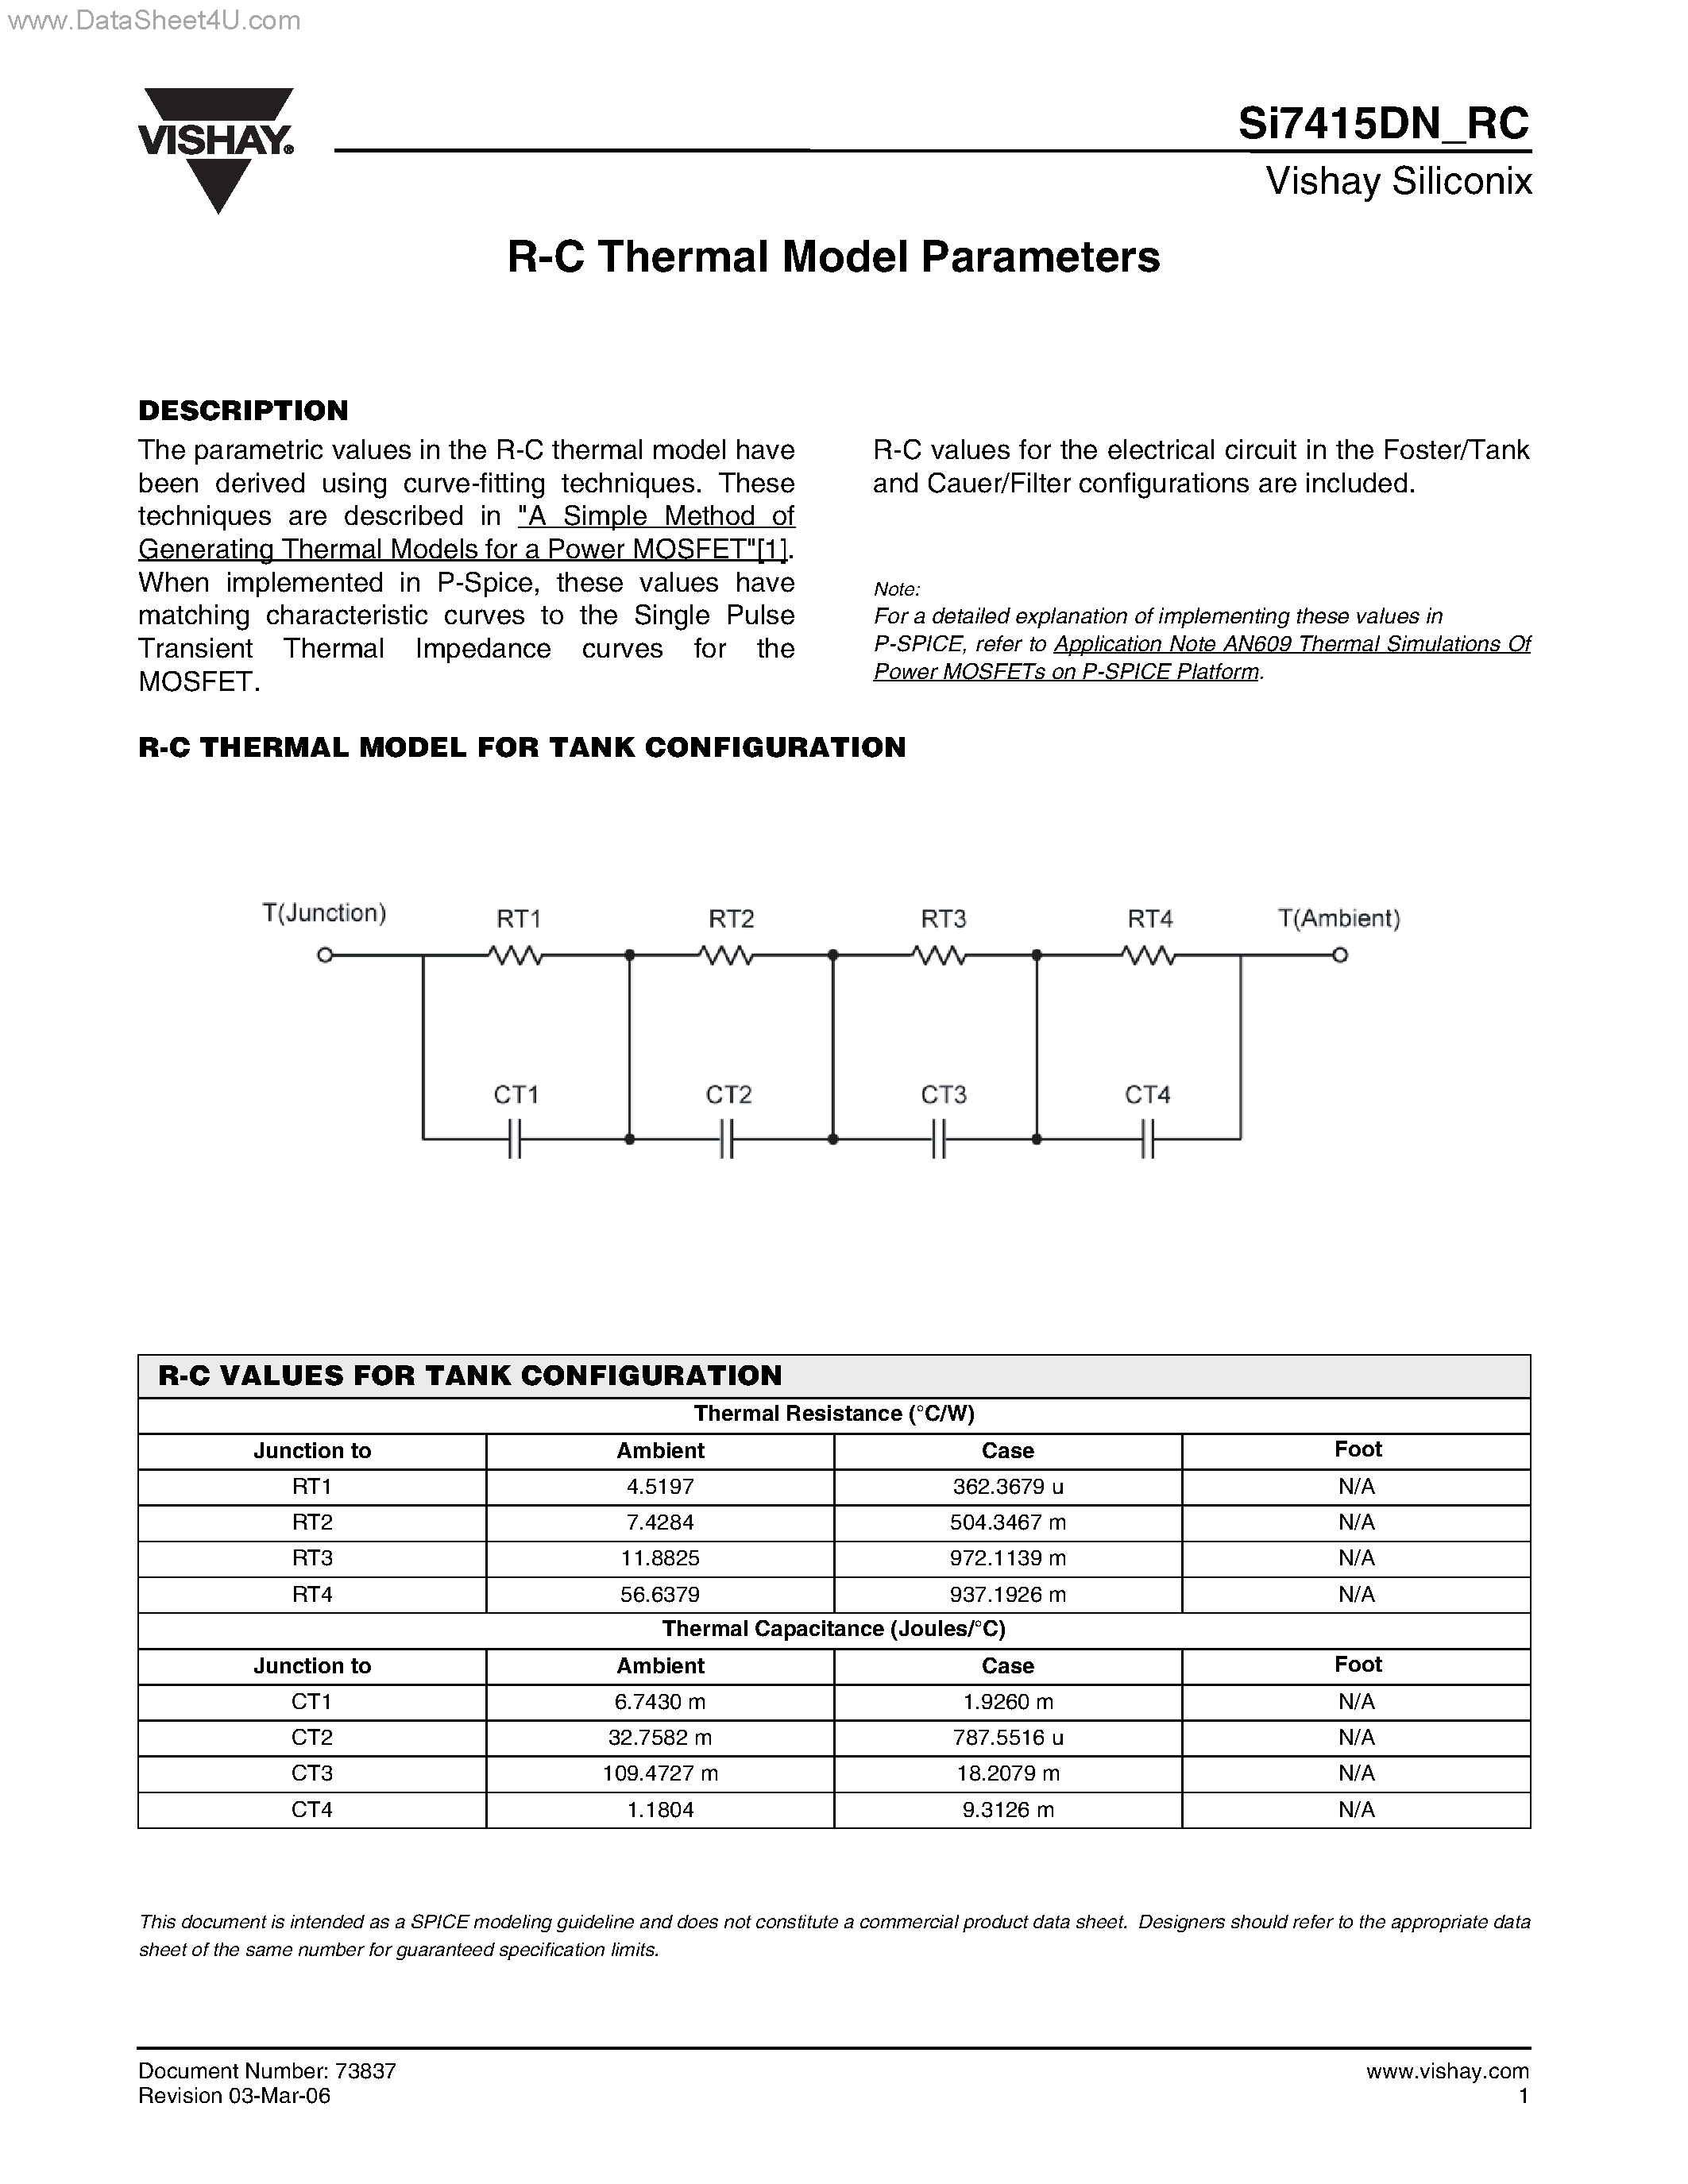 Даташит SI7415DN-RC - R-C Thermal Model Parameters страница 1